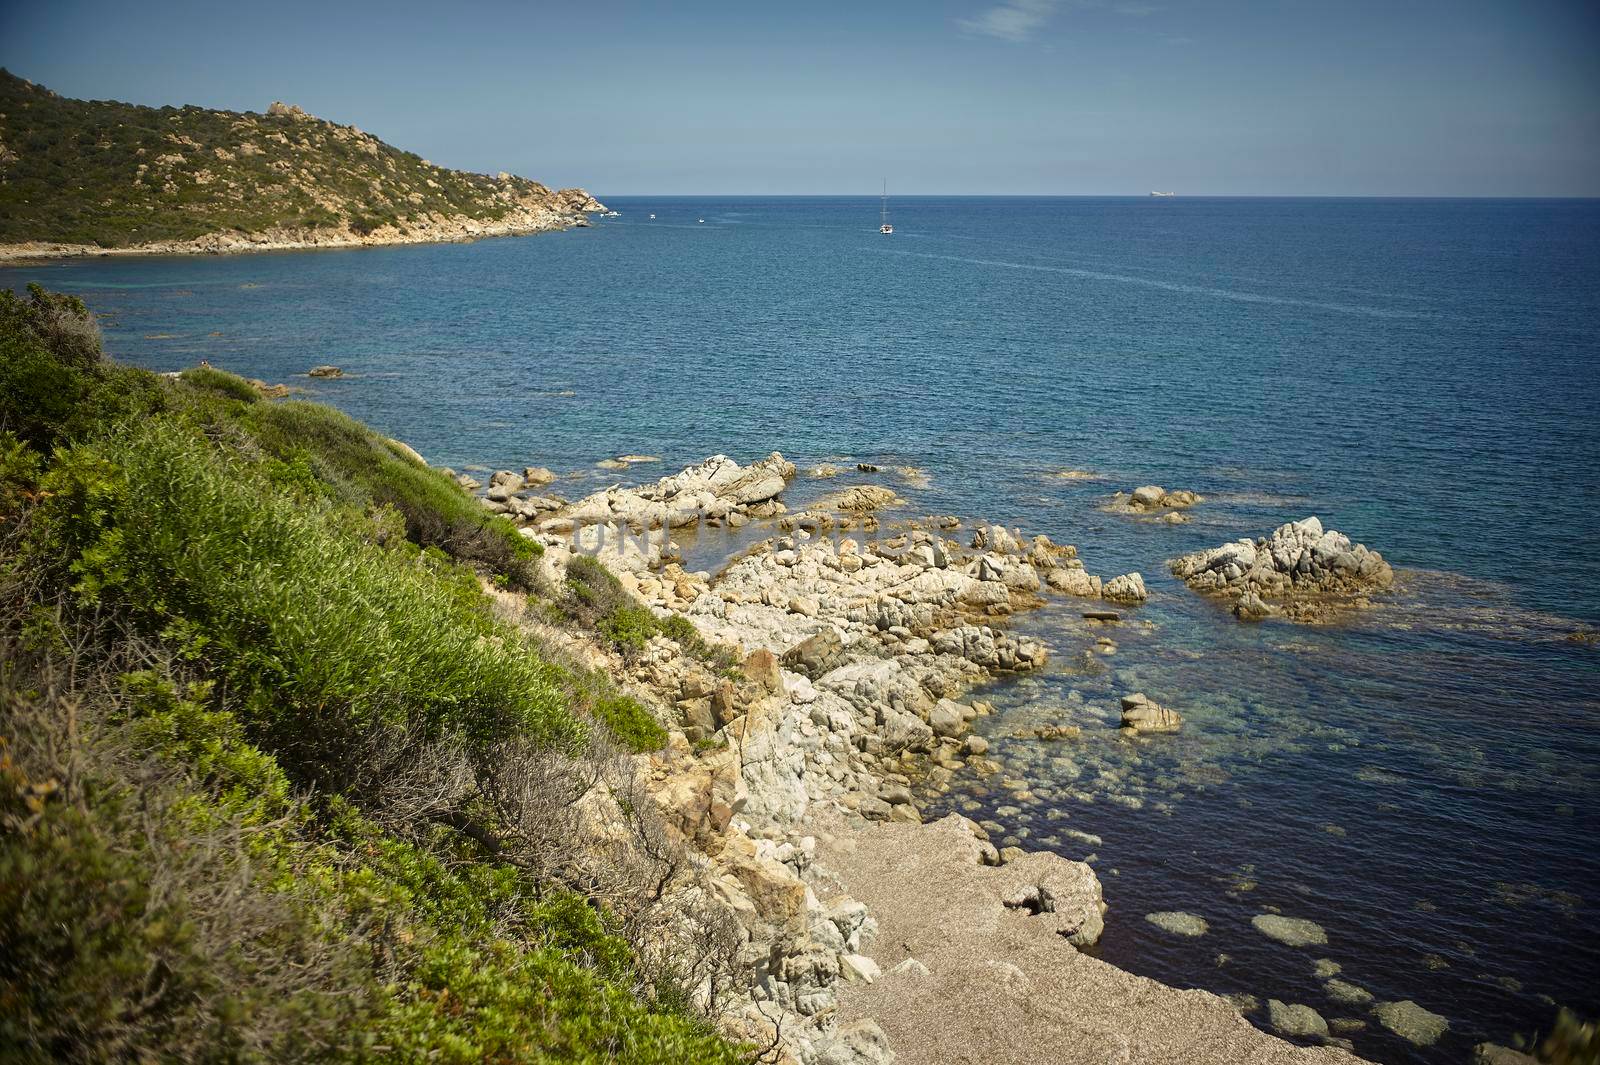 Natural inlet between the mountains and the sea in the south of Sardinia with the outline of a typical Mediterranean vegetation that grows spontaneously on the rocky walls.